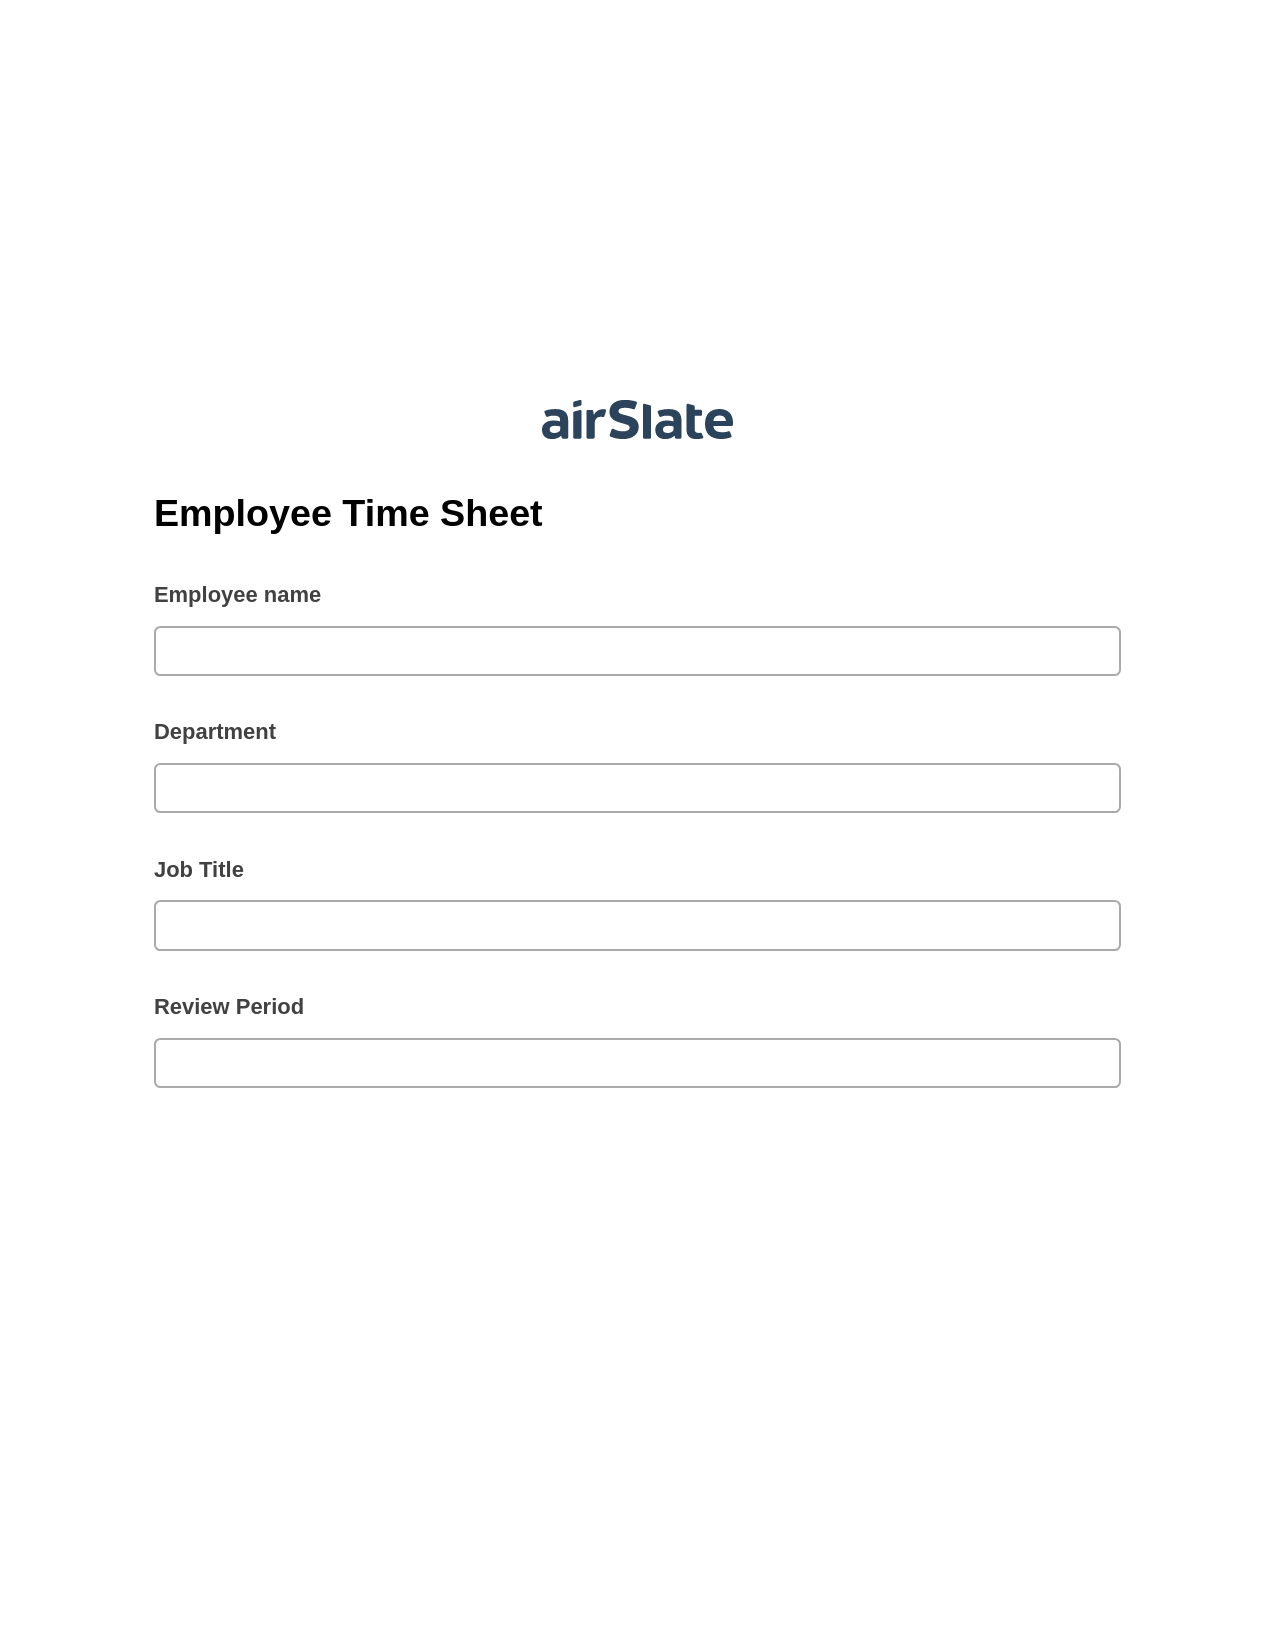 Employee Time Sheet Pre-fill from CSV File Bot, Create slate addon, Archive to Box Bot